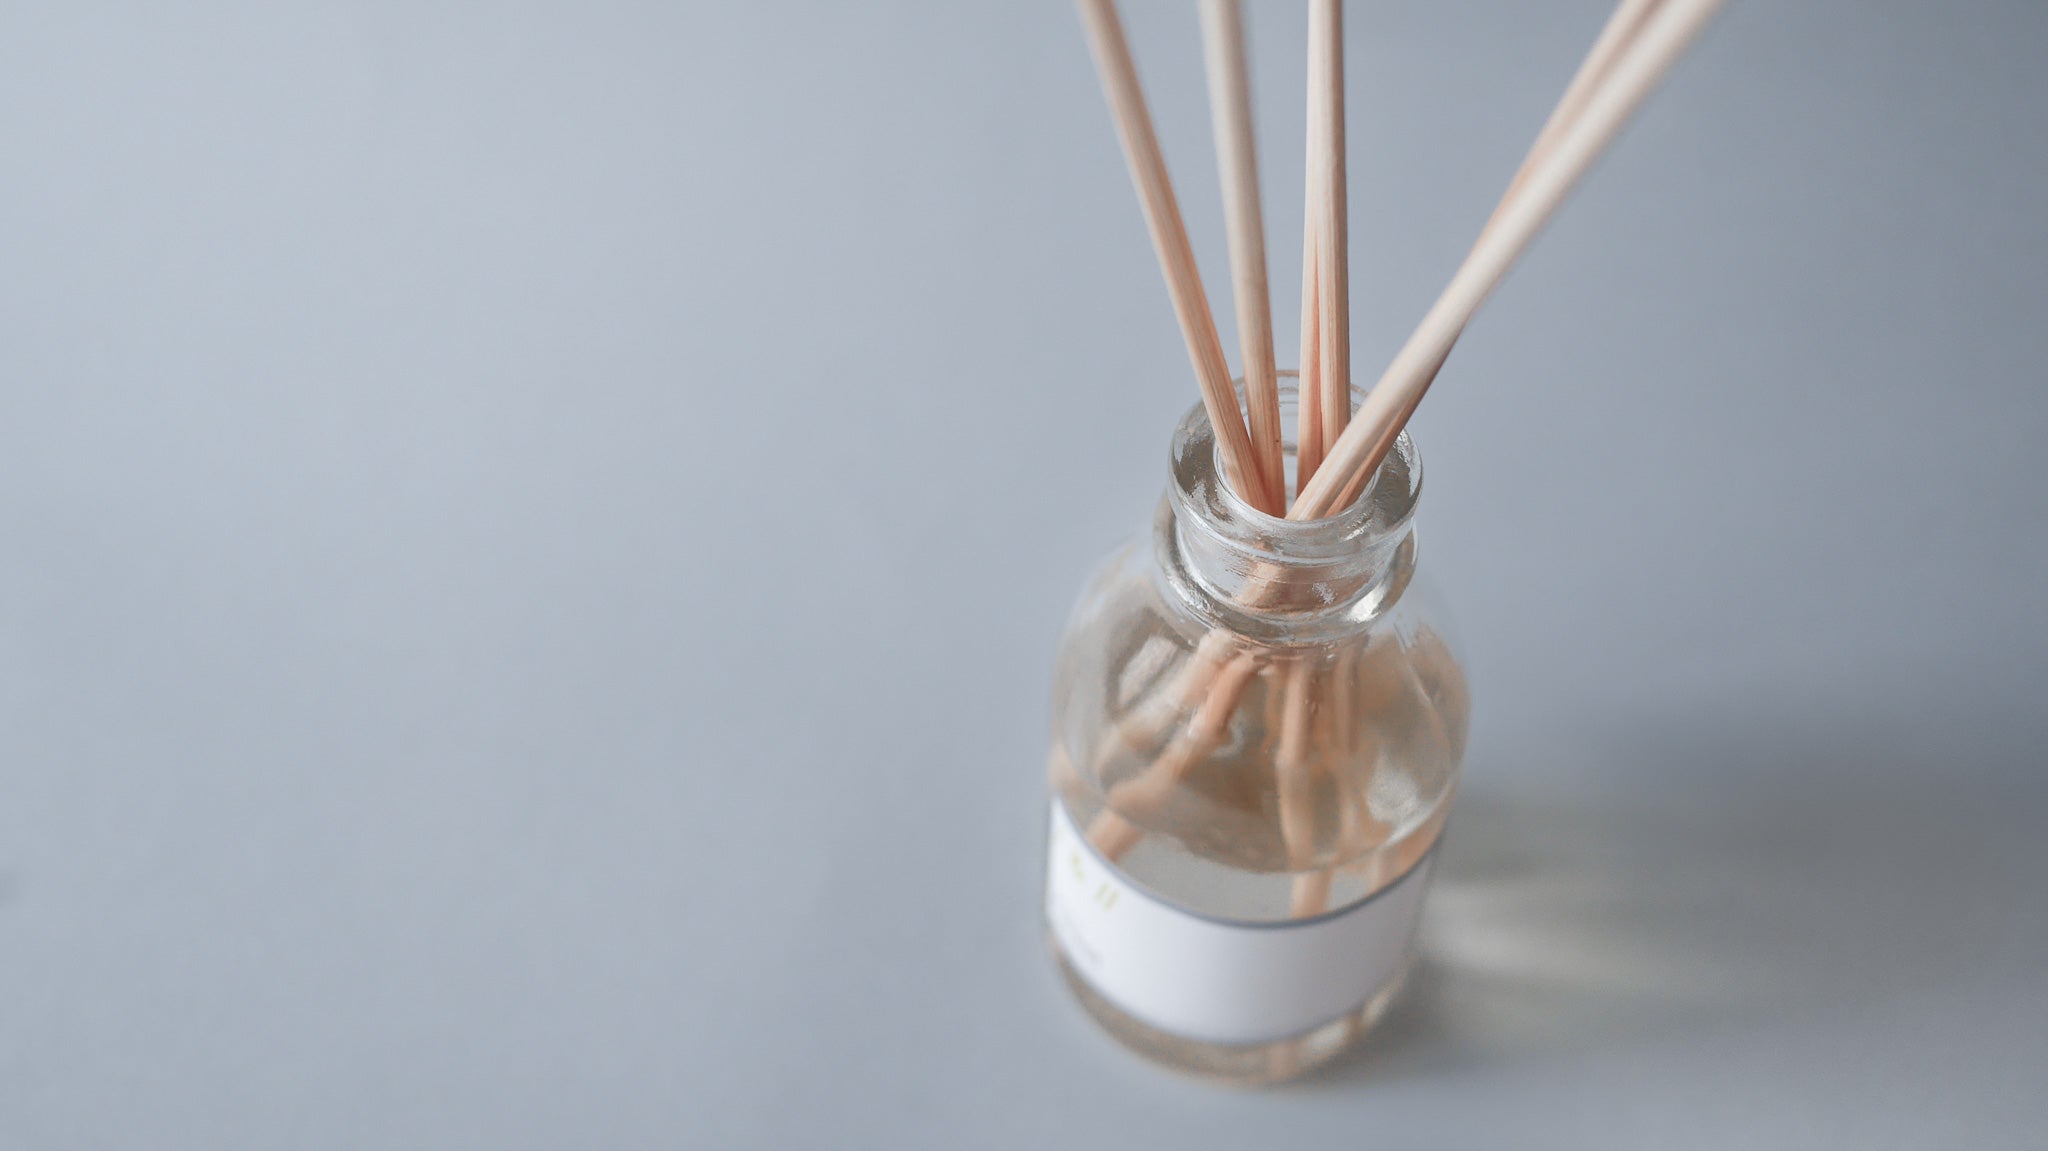 forest / reed diffuser 100ml & 200ml // this series